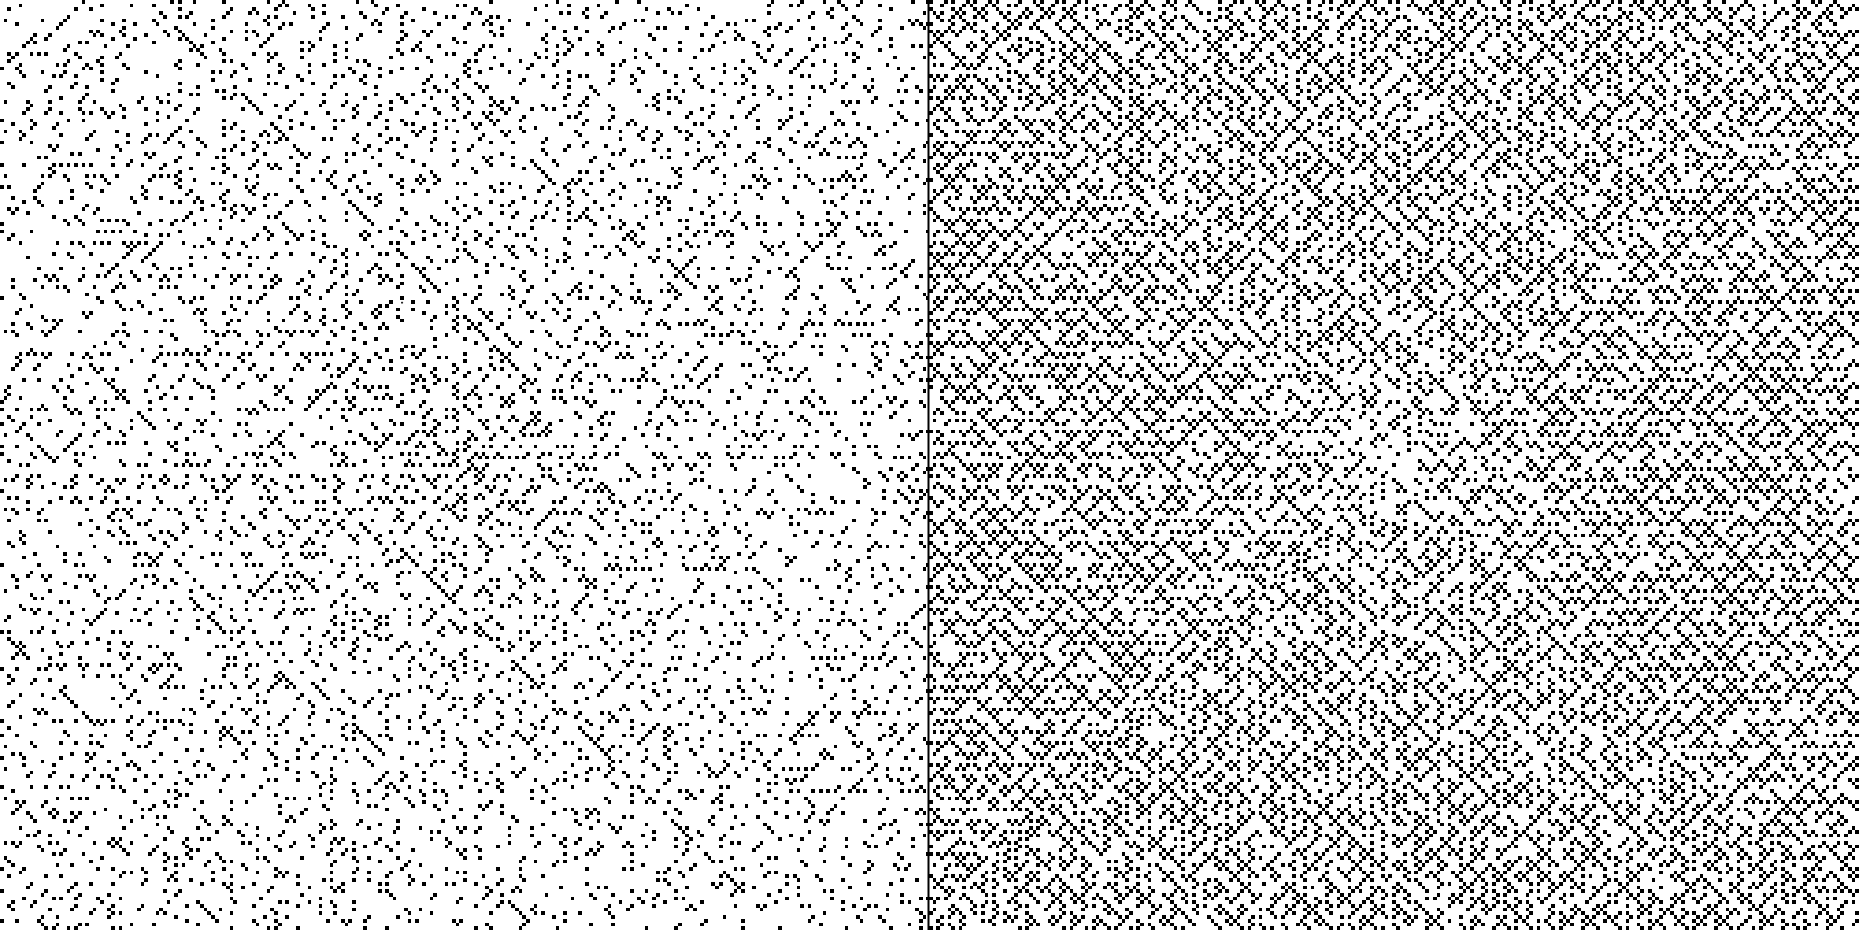 spiral with near-prime numbers